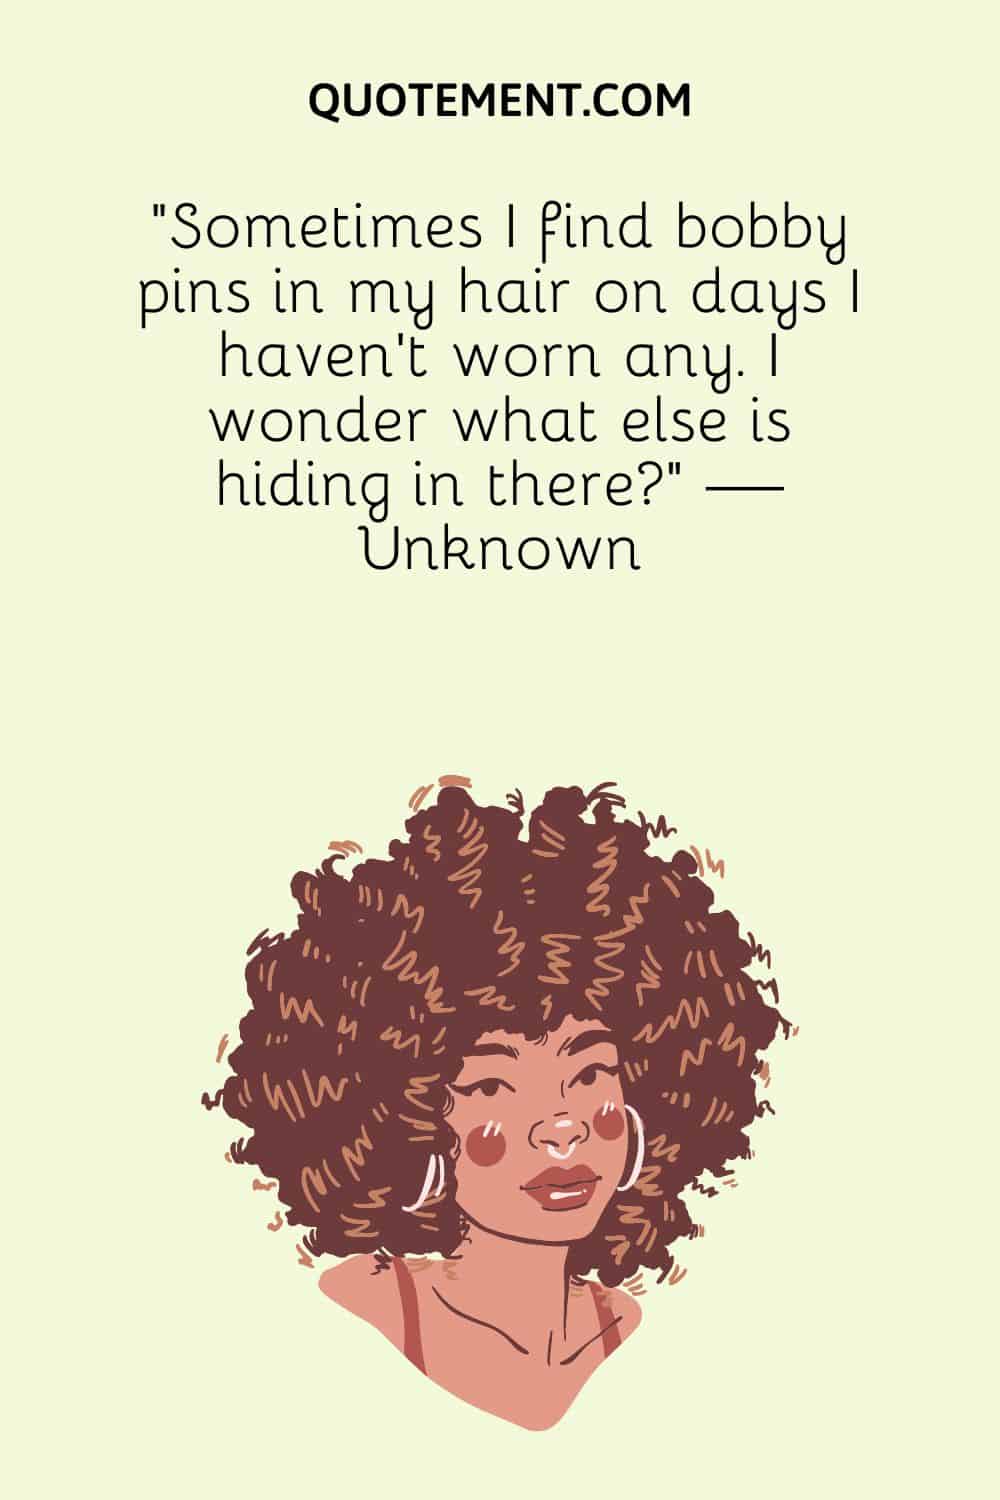 90 Fantastic Curly Hair Quotes To Embrace Your Curls